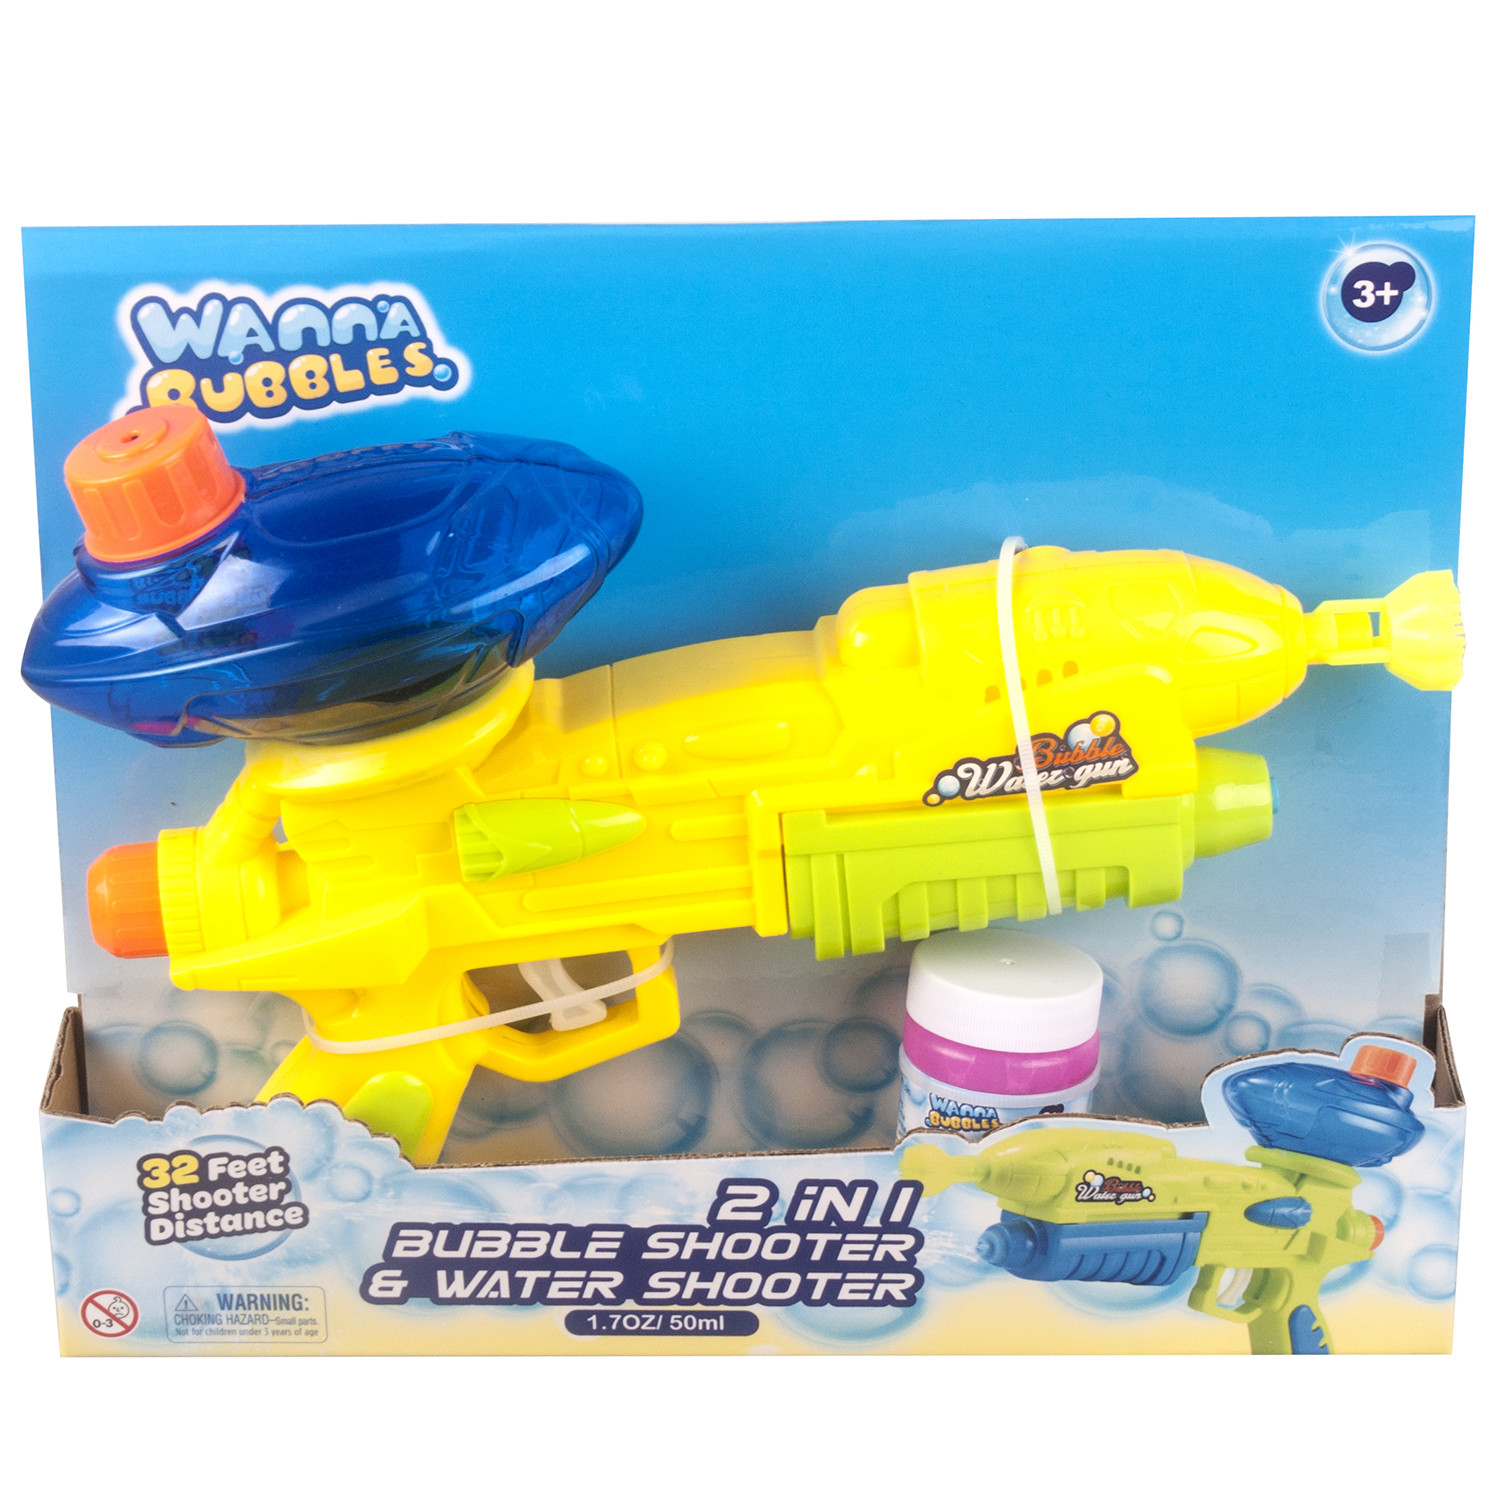 2-in-1 Bubble and Water Shooter Image 4